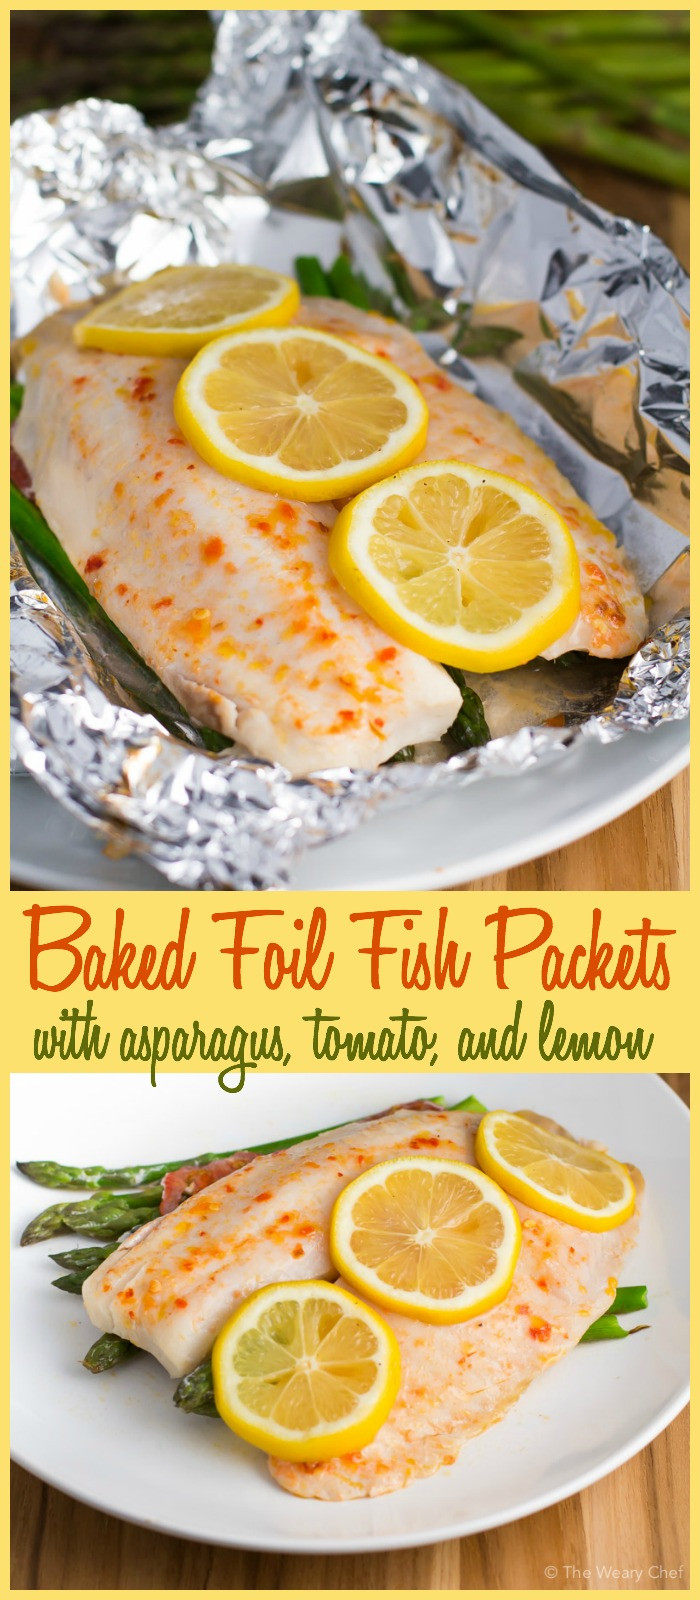 Fish In Foil Packets Recipes
 Baked Foil Fish Packets with Asparagus and Tomato The